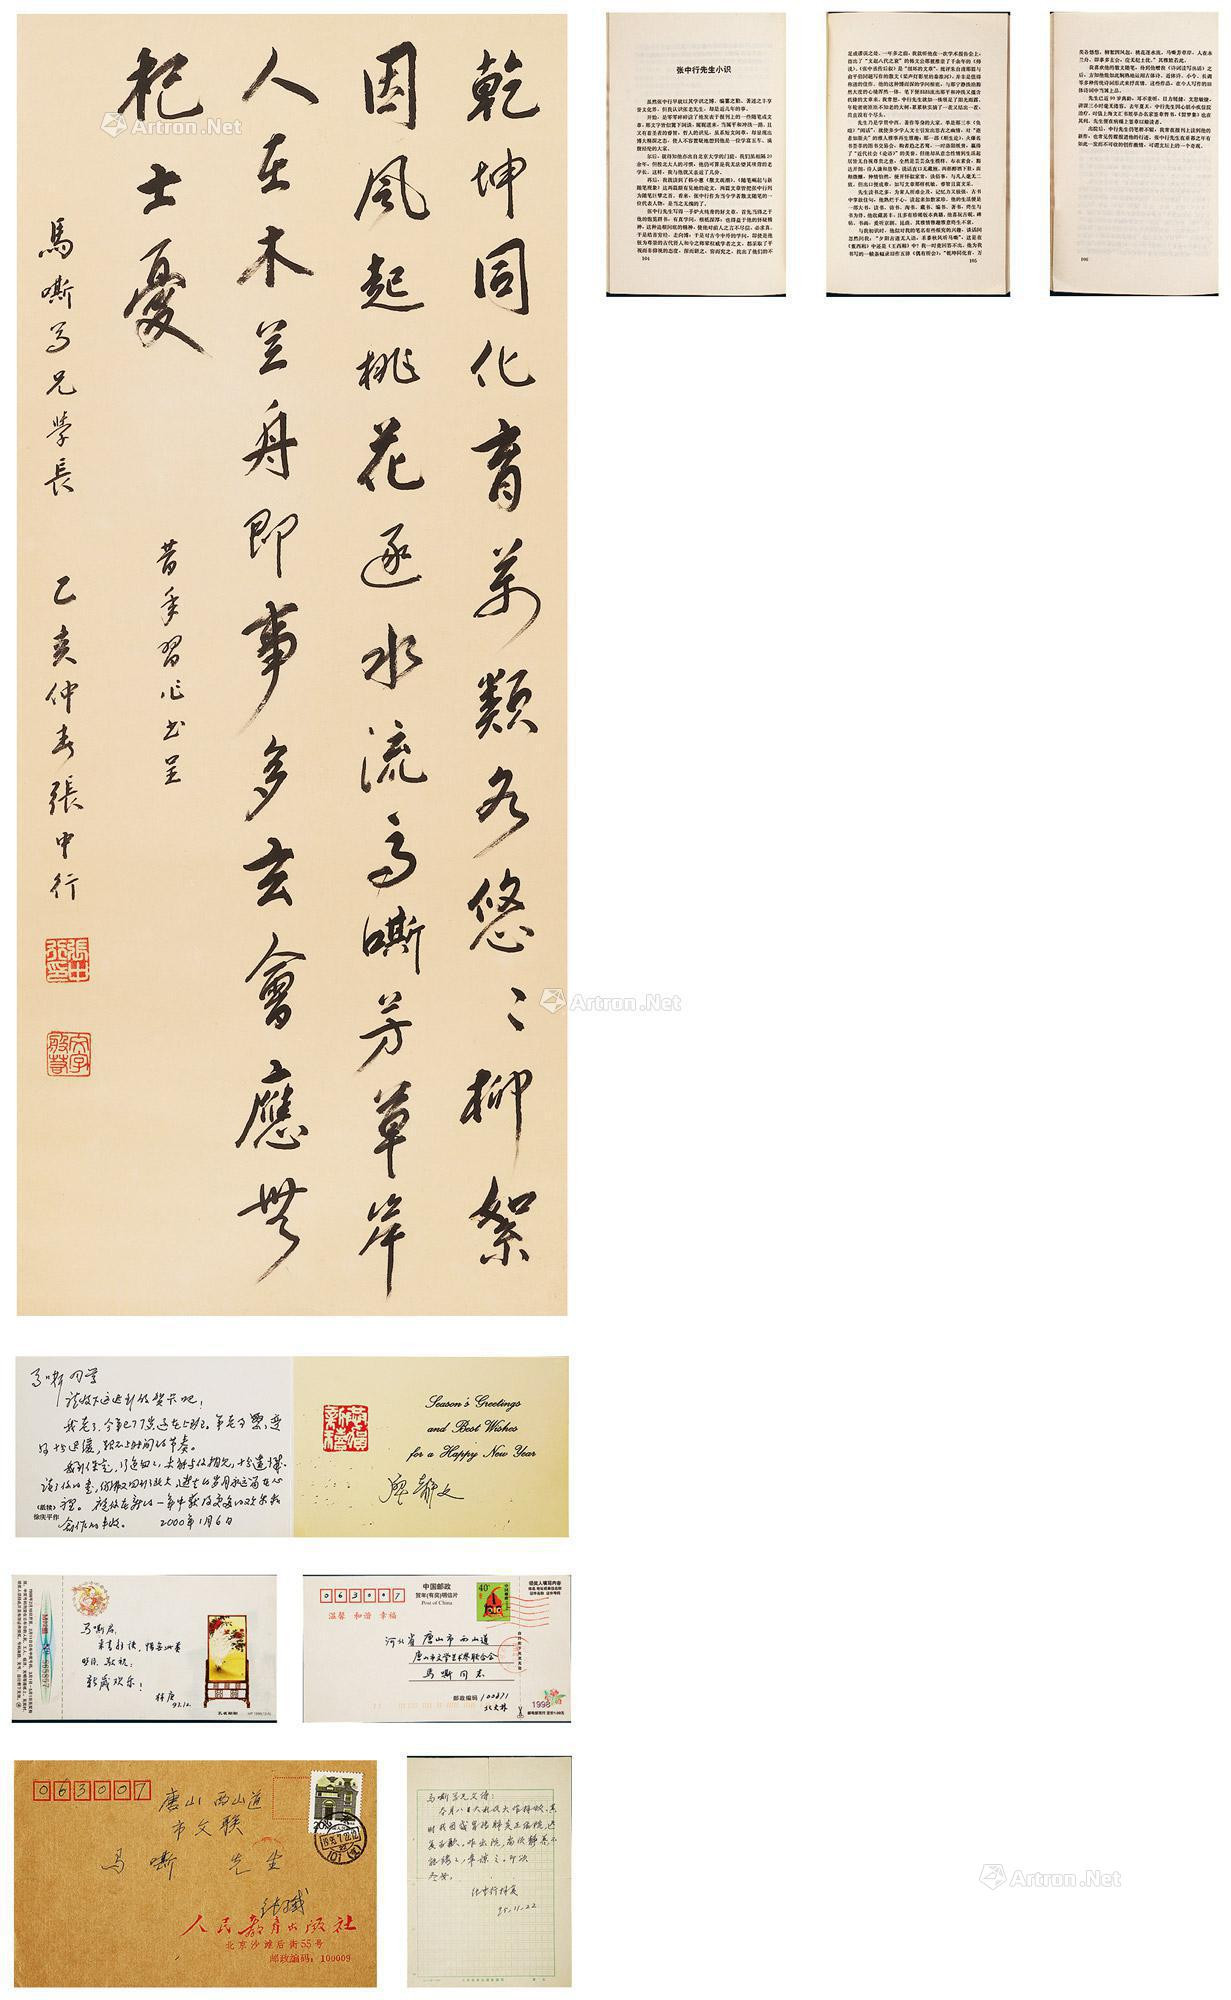 Calligraphy by Zhang Zhongxing to Ma Si， group of letters by Zhang Zhongxing， Lin Geng and Liao Jingwen to Ma Si， with original cover and one volume of publications.